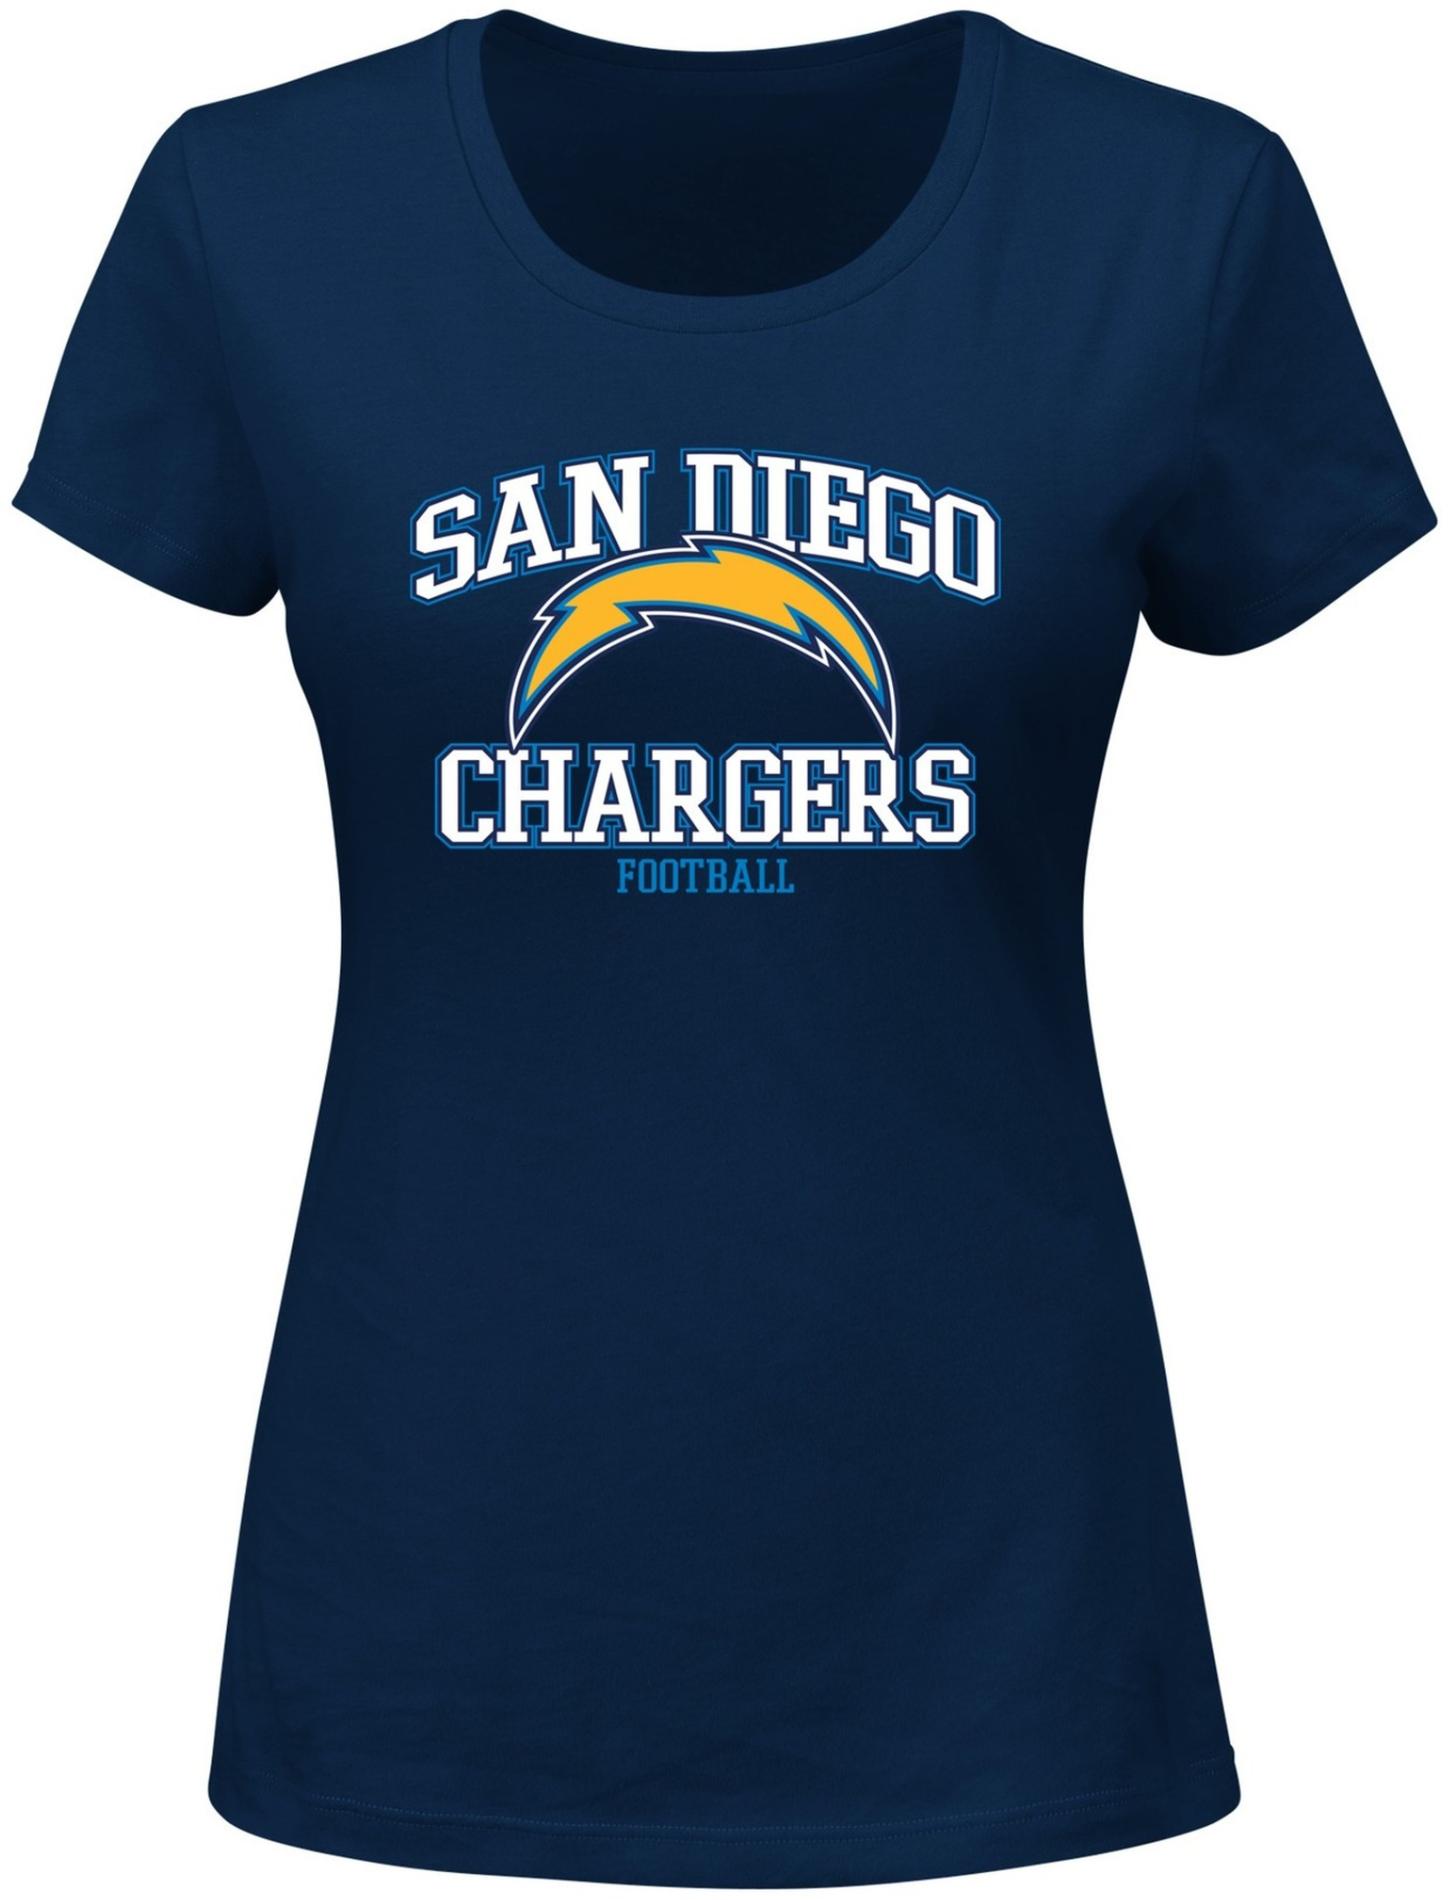 NFL Women's Graphic T-Shirt - San Diego Chargers